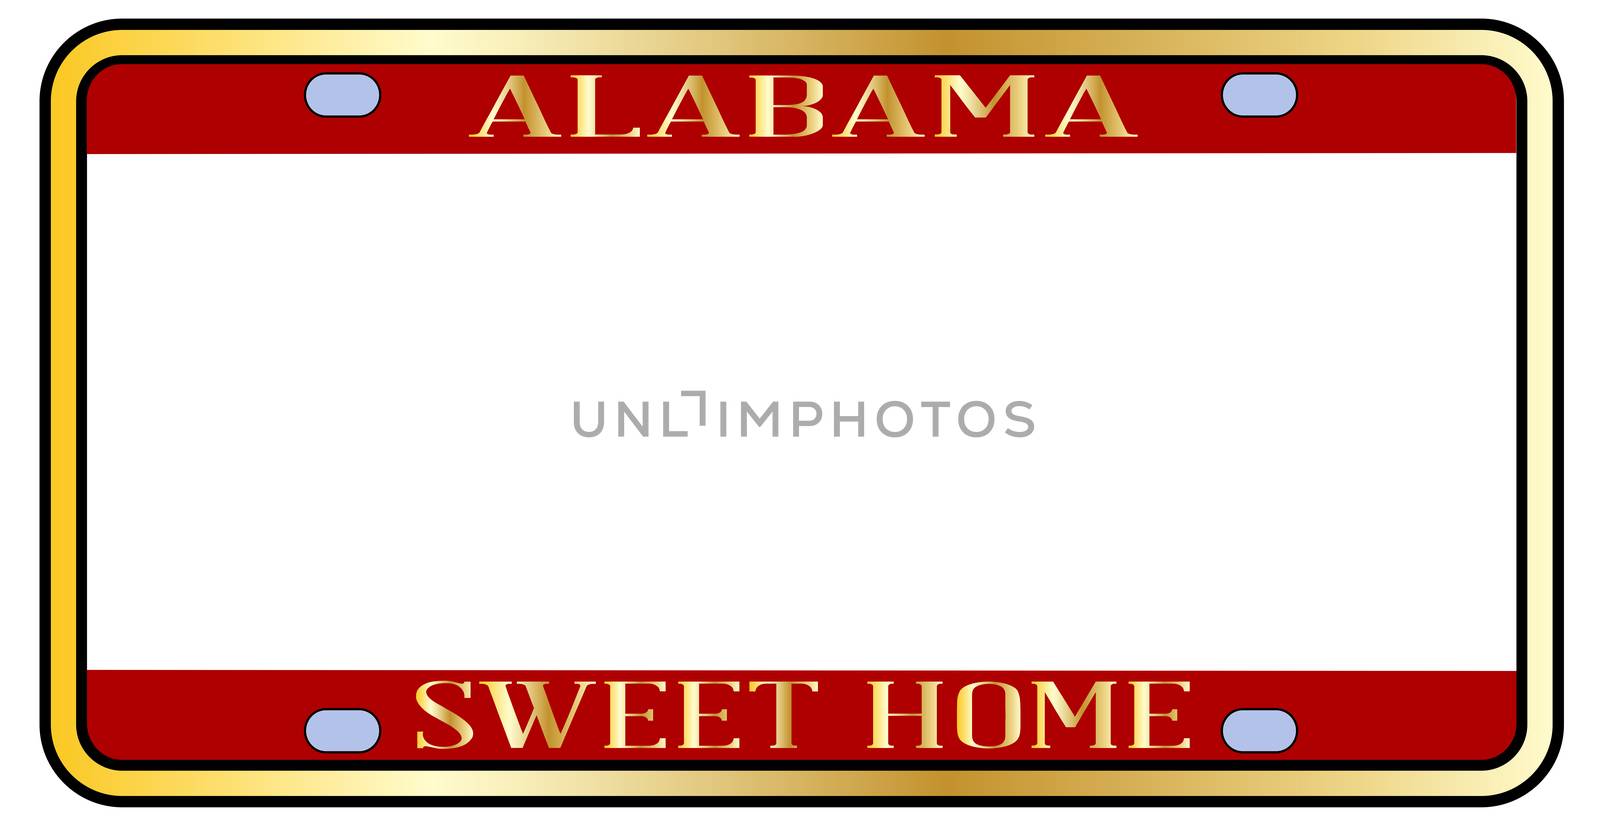 Blank Alabama state license plate in the colors of the state flag over a white background